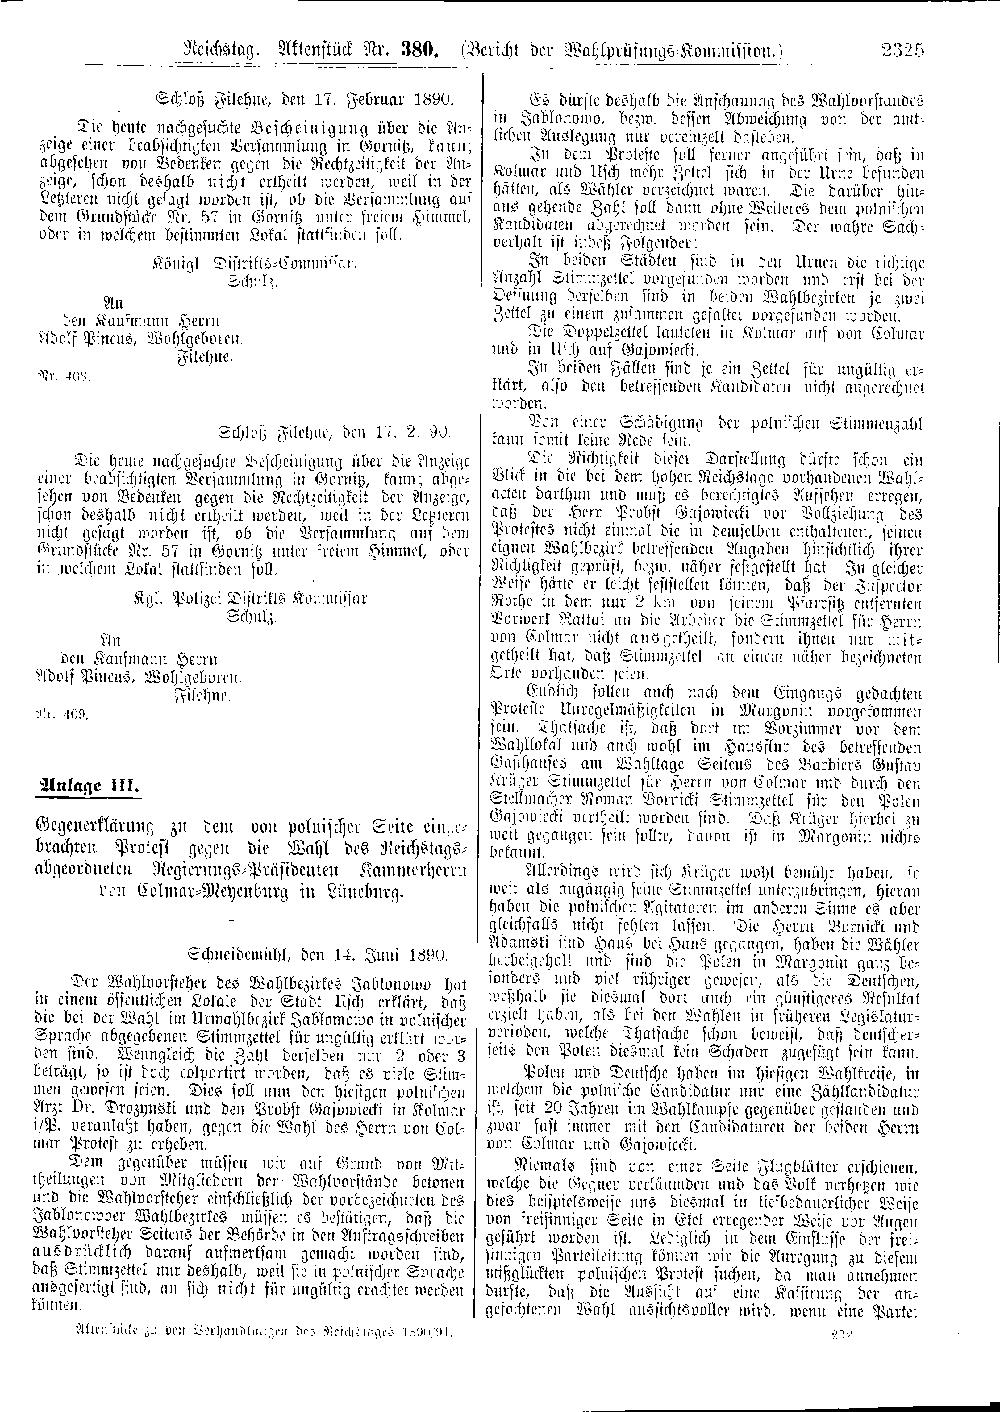 Scan of page 2325